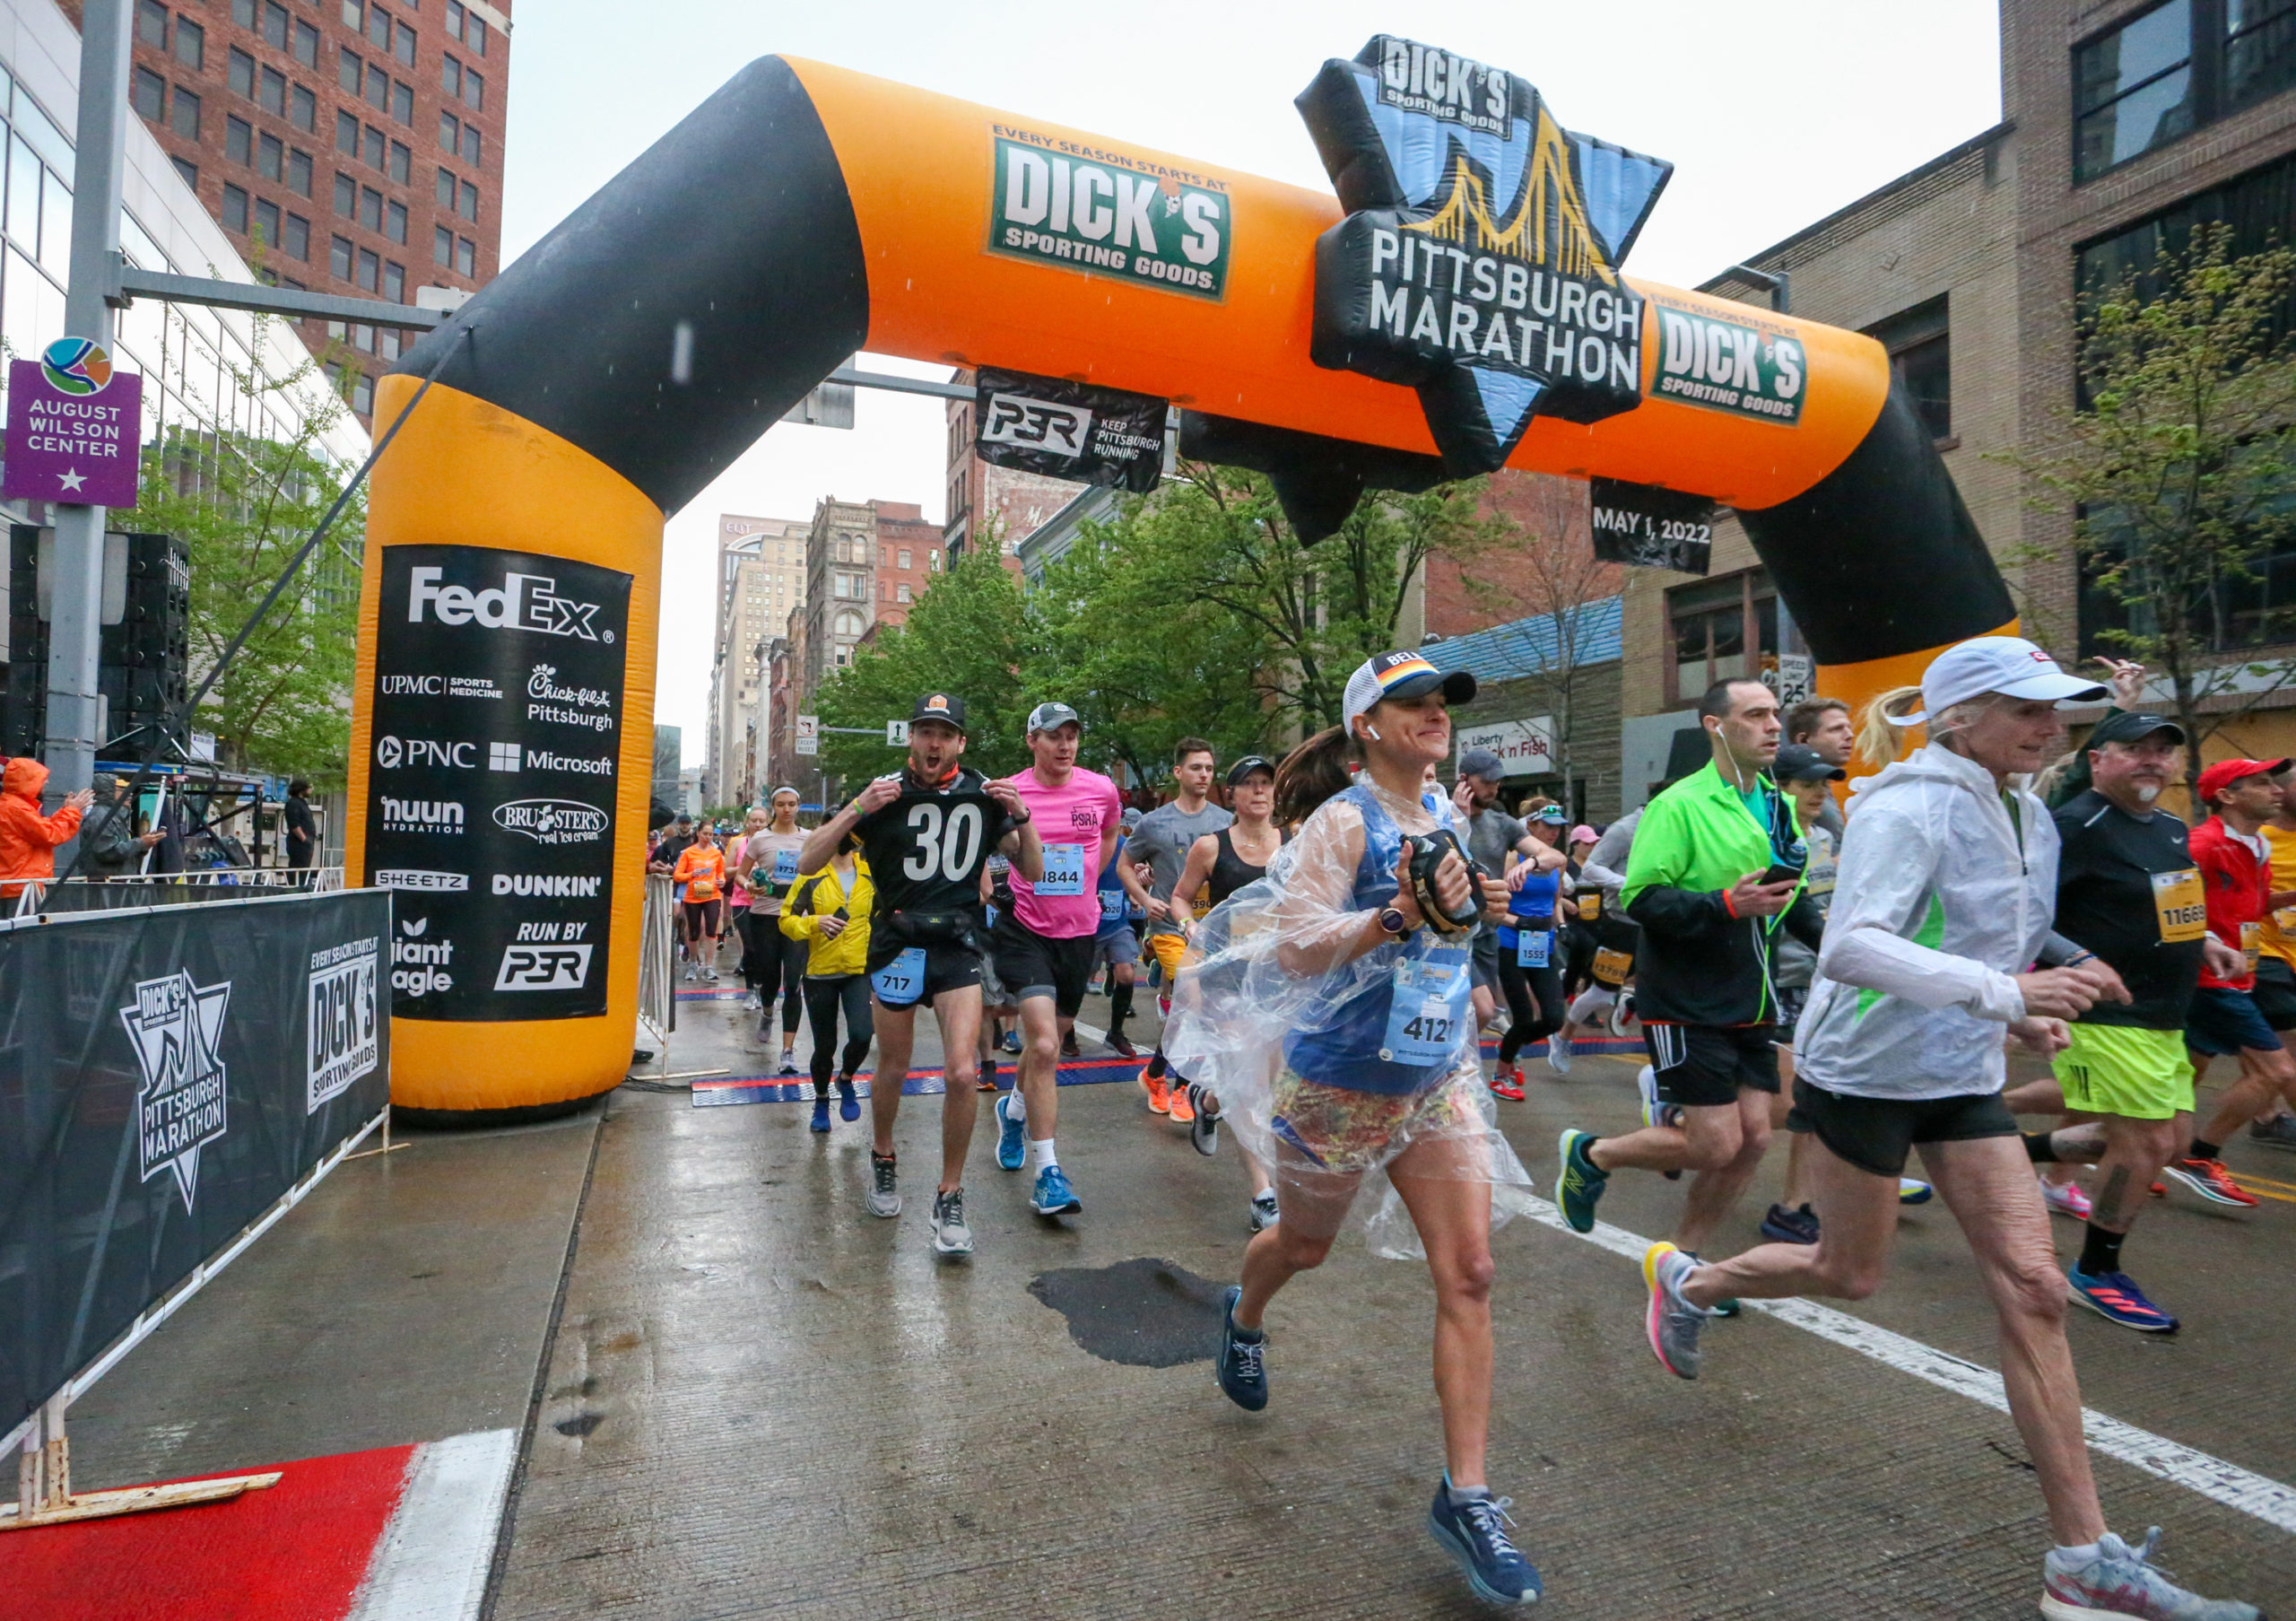 17,000 MOVERS Braved Weather to Return to Pittsburgh for Marathon